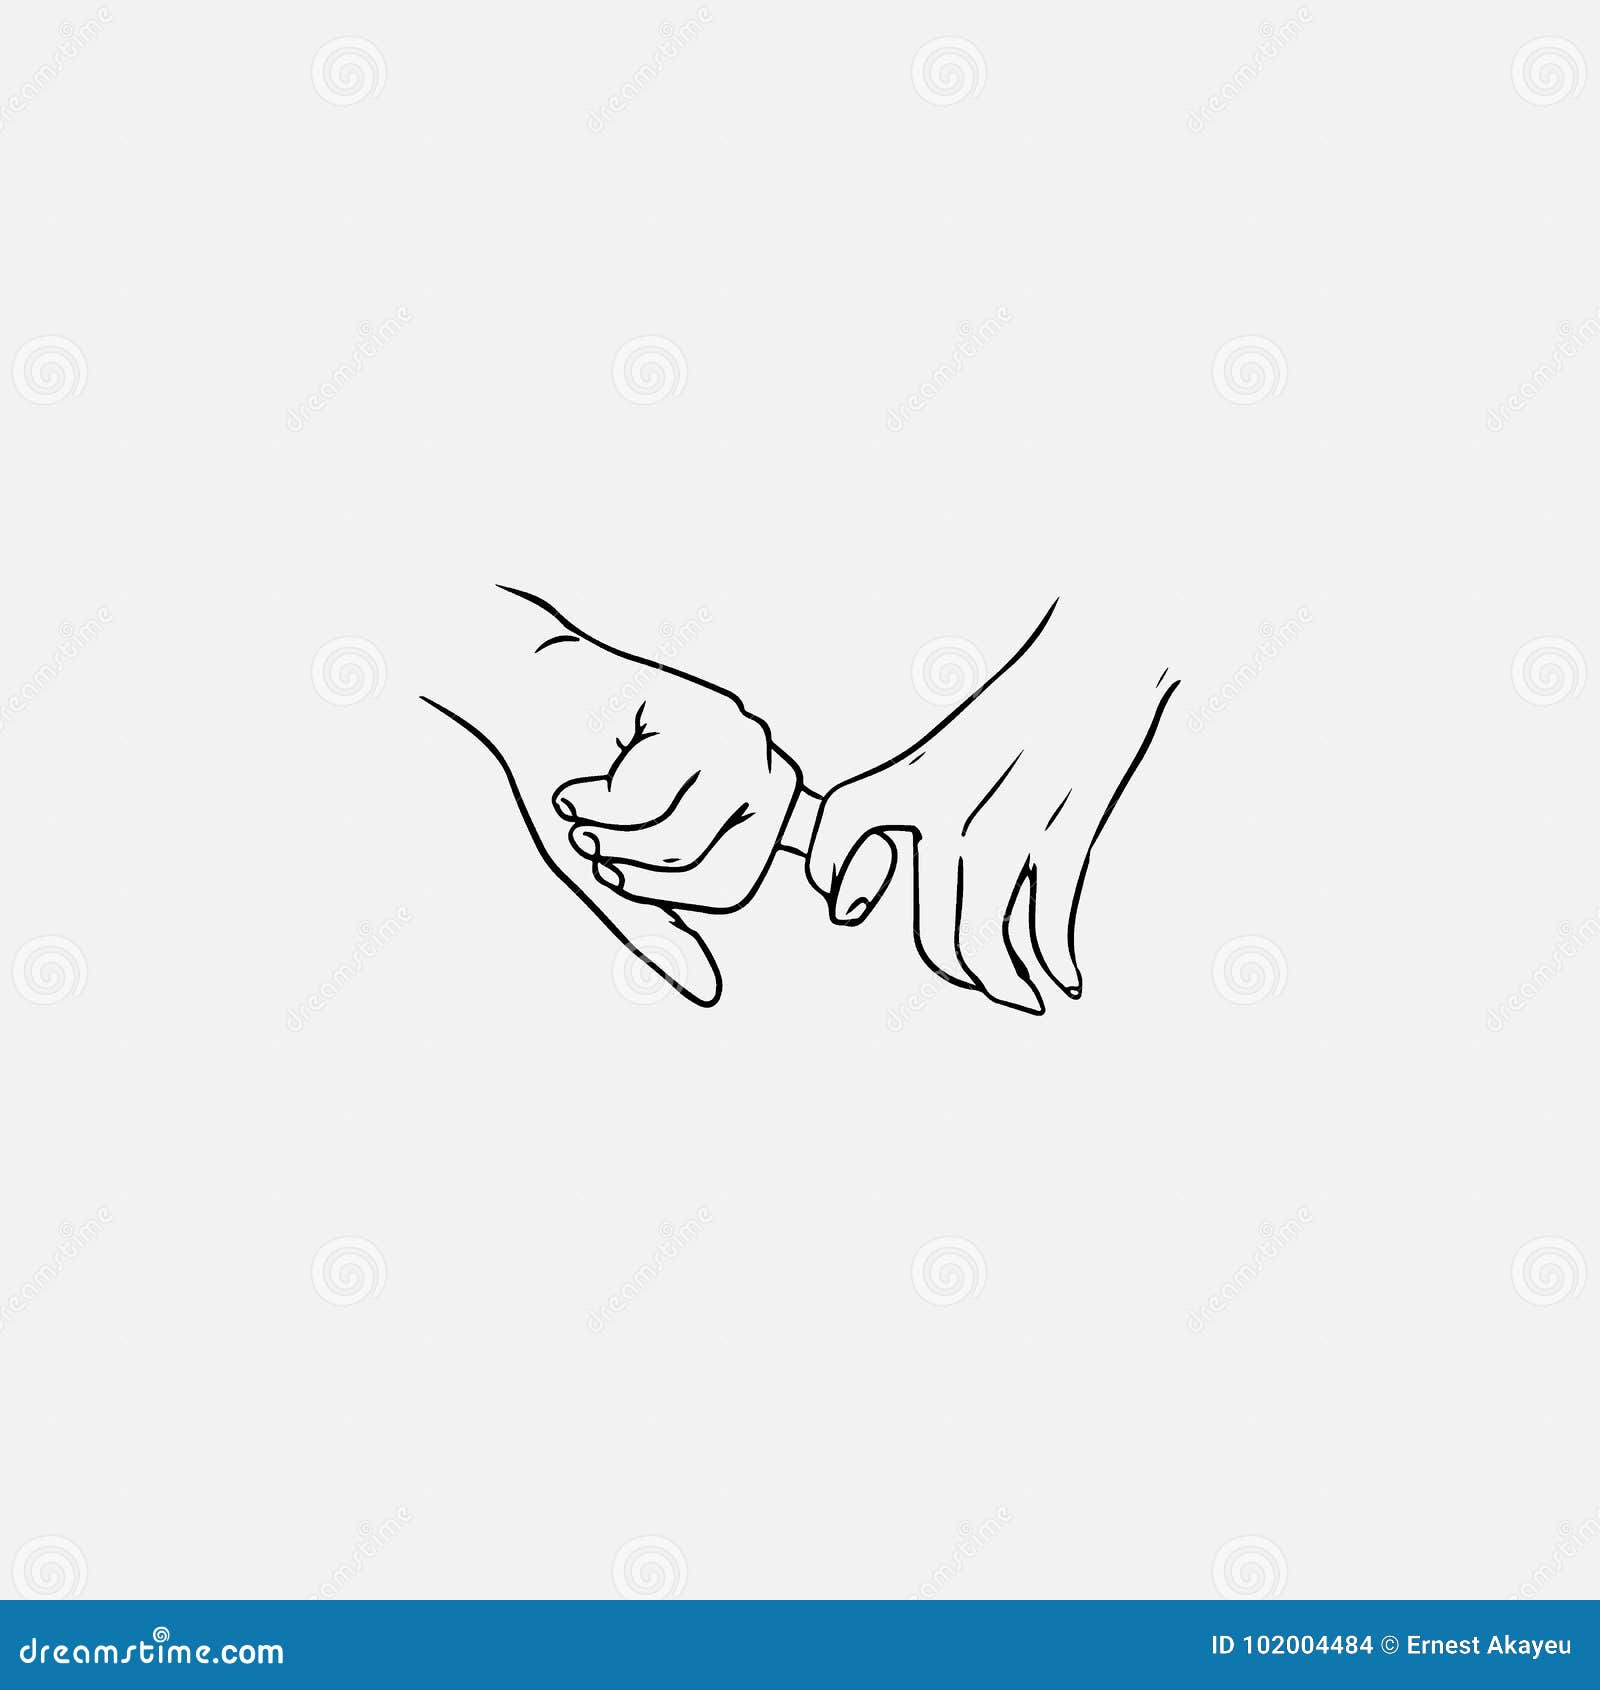 easy contour drawings of people holding hands